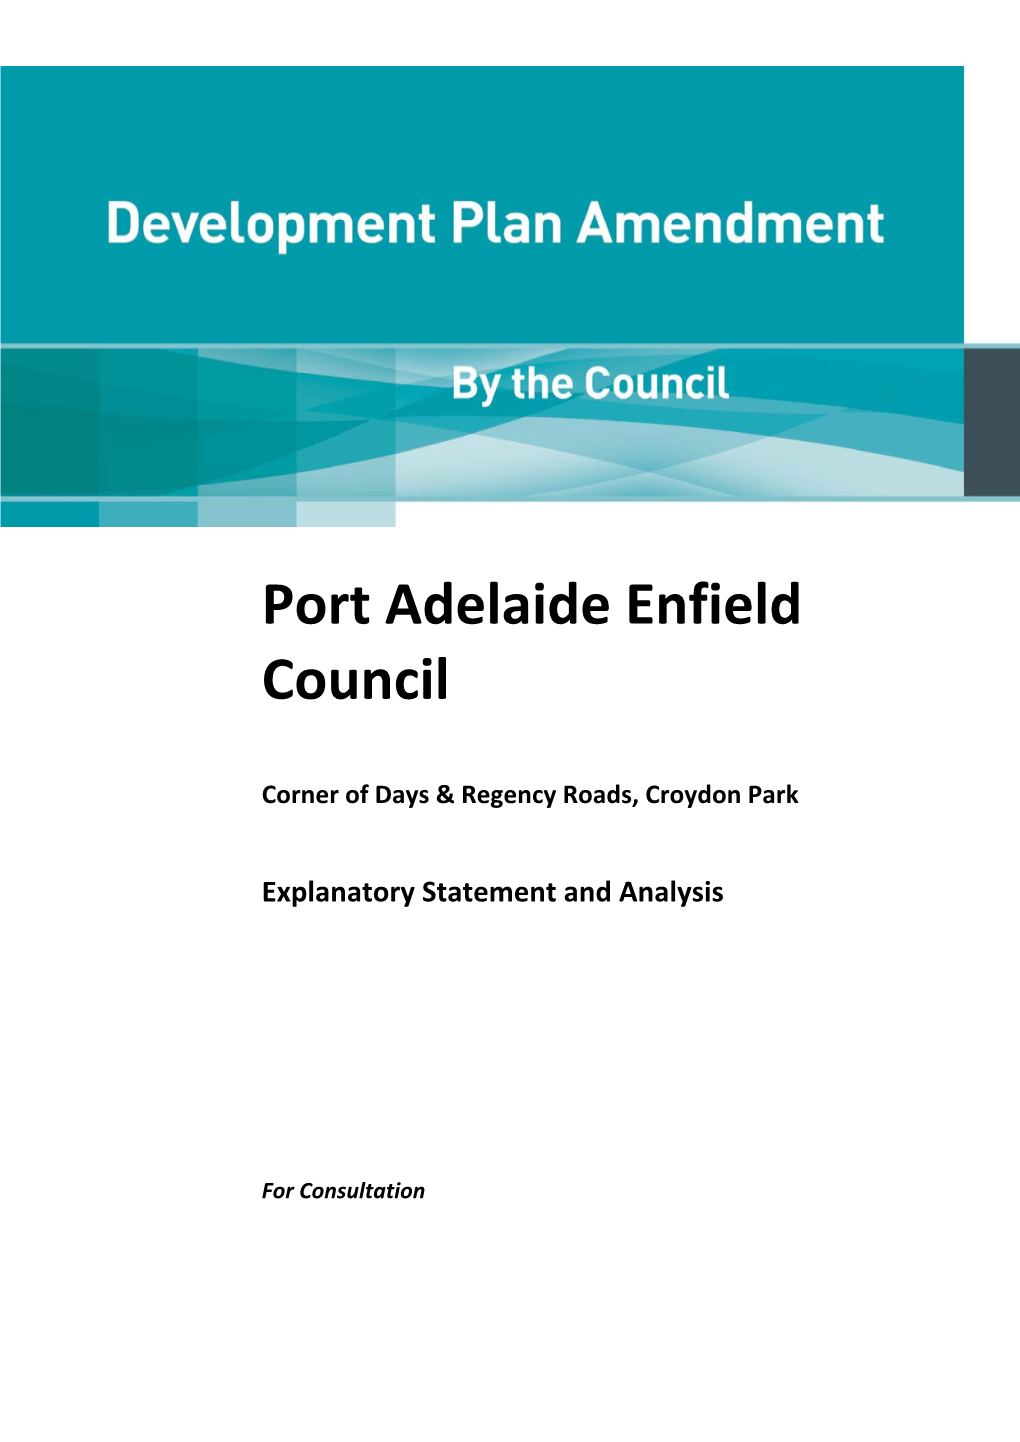 Port Adelaide Enfield Council